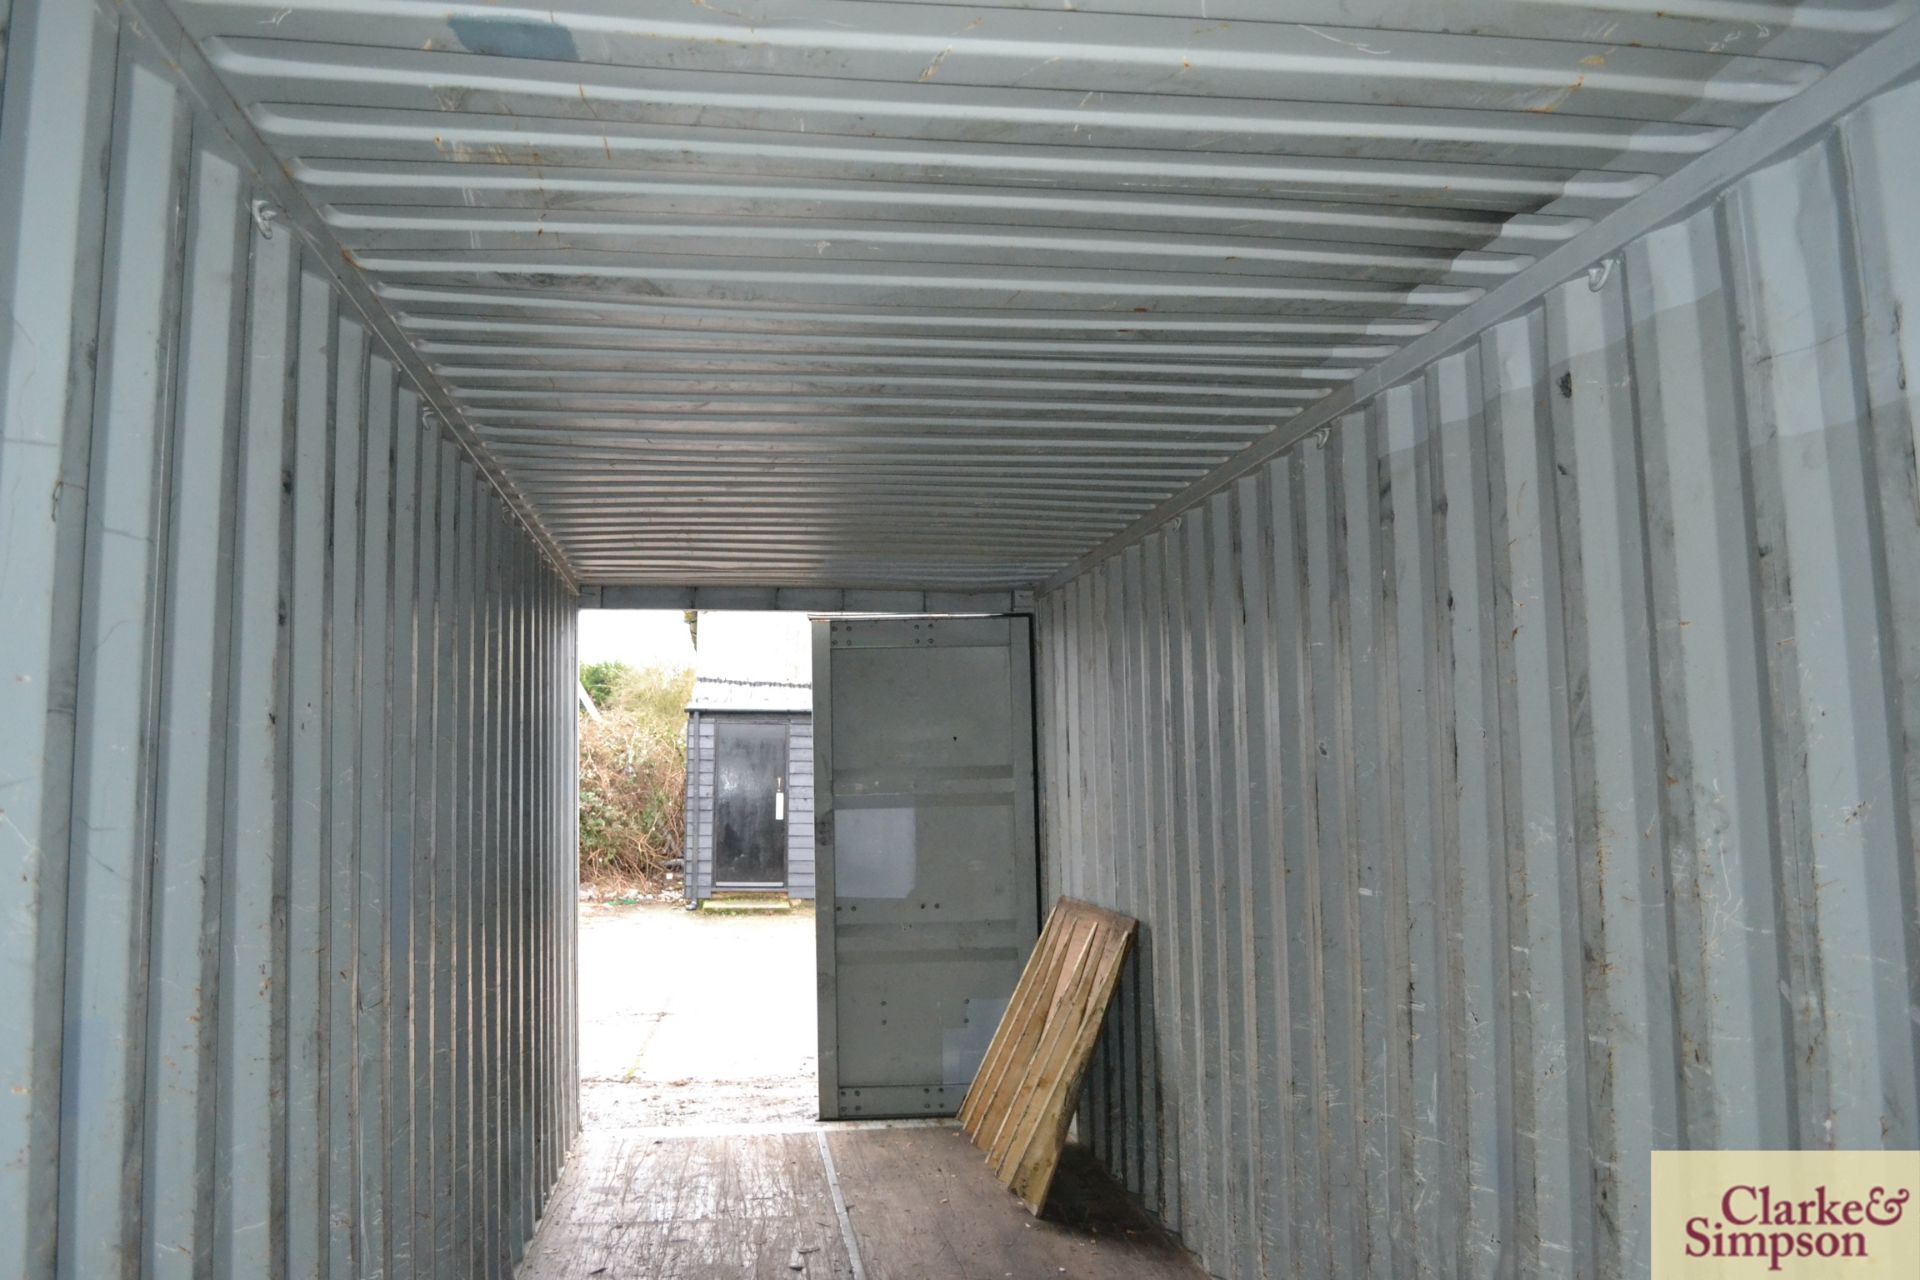 40ft shipping container. 2003. To be sold in situ and removed at purchaser's expense. - Image 7 of 7